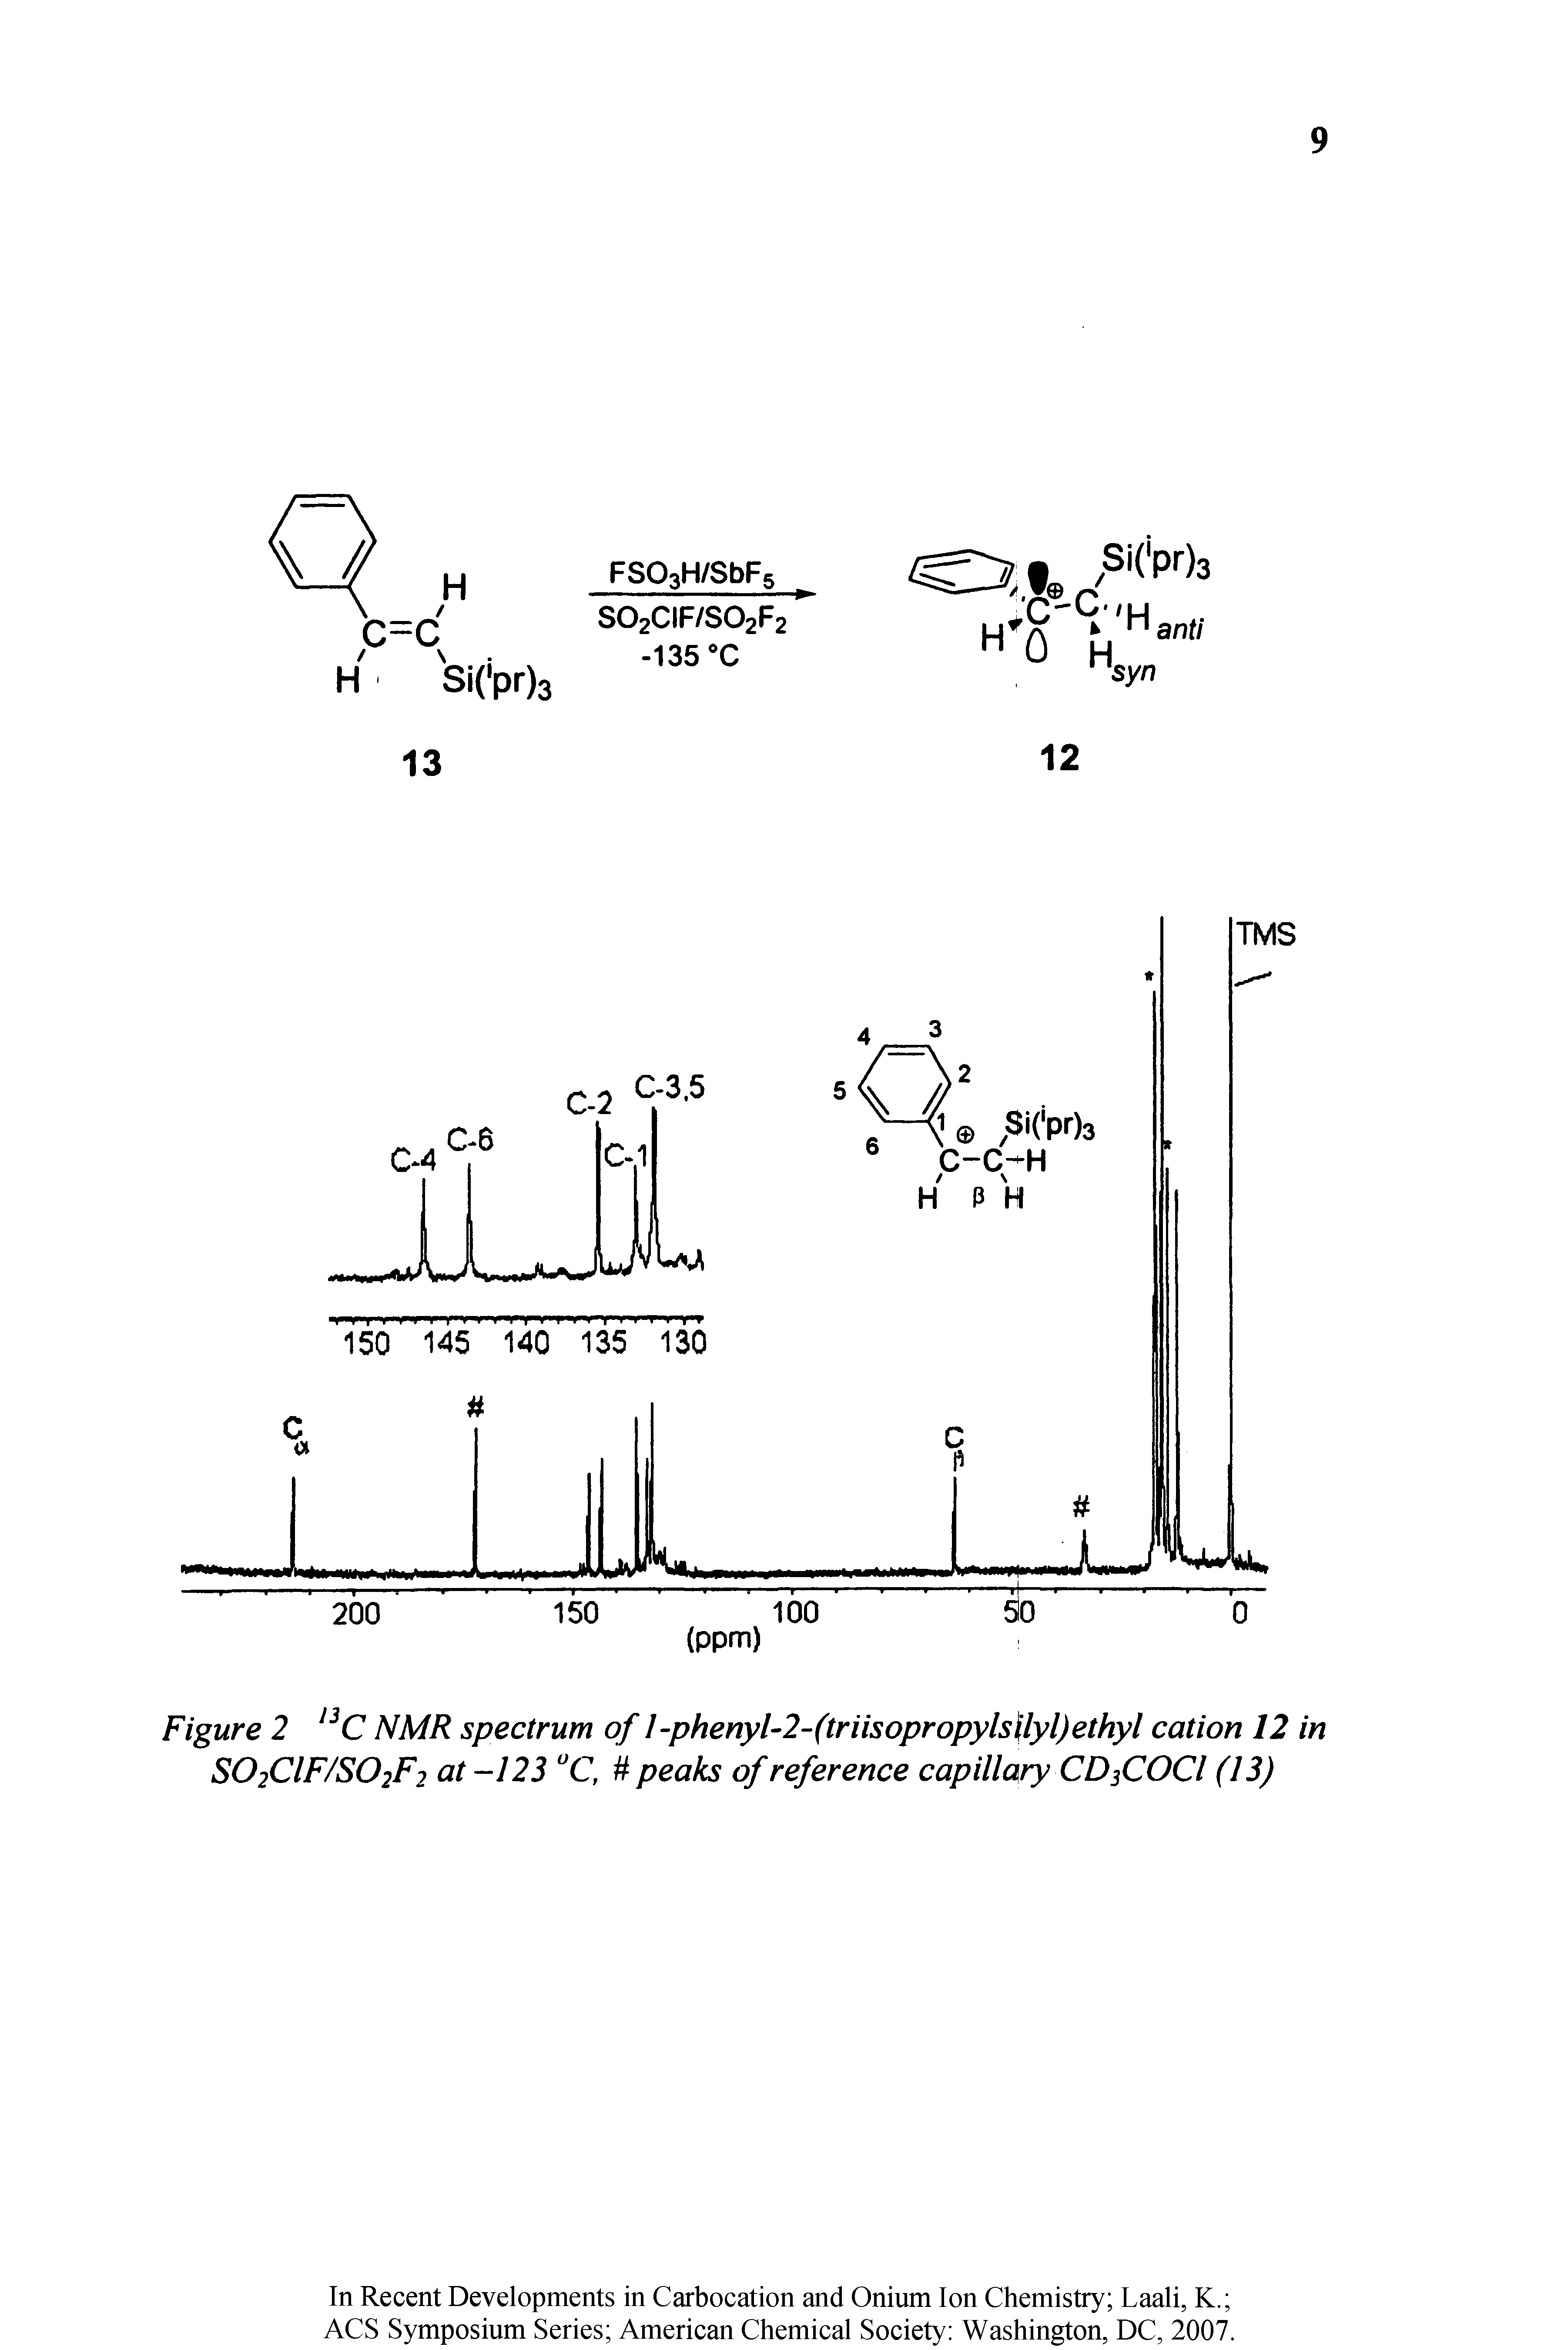 Figure 2 13C NMR spectrum of l-phenyl-2-(triisopropylsUyl) ethyl cation 12 in SO2CIF/SO2F2 at -123 °C, peaks of reference capillary CD3COCl (13)...